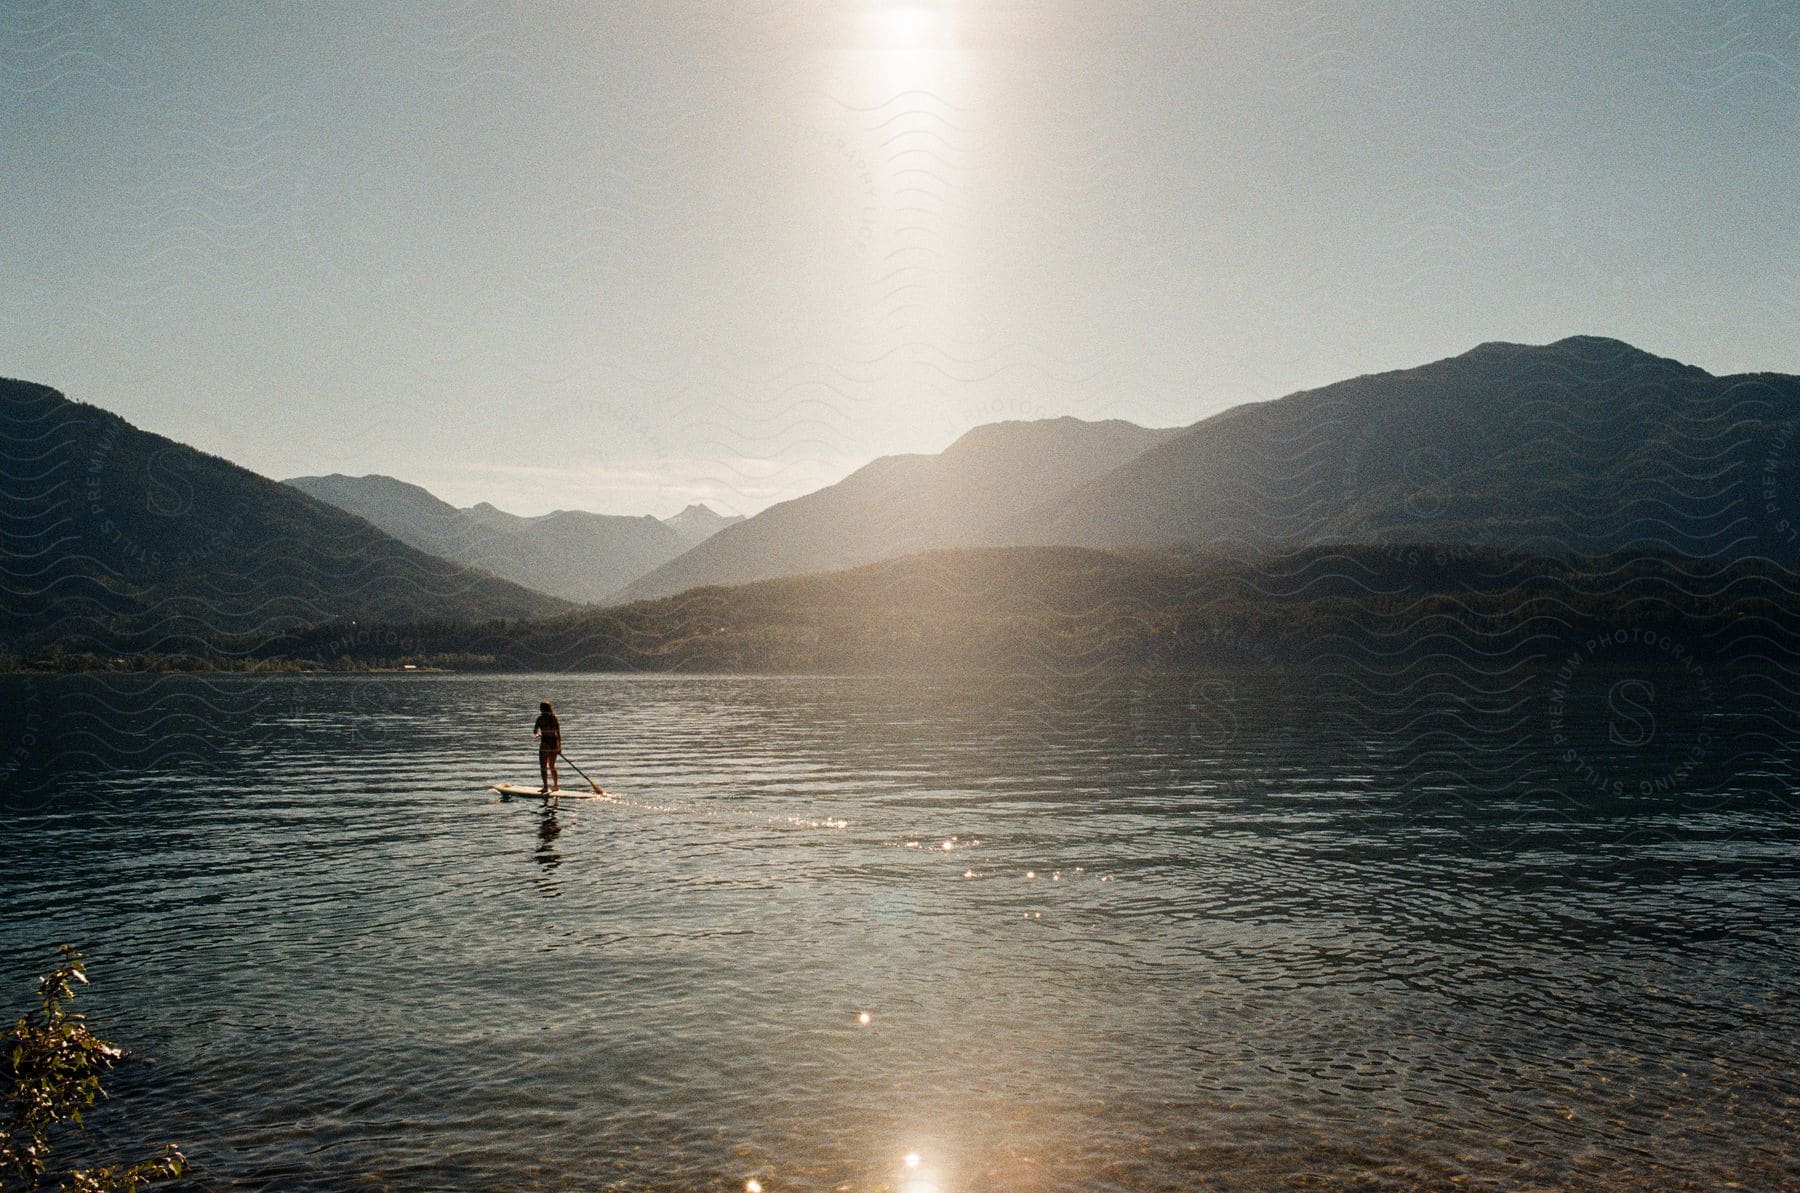 A person paddleboarding across a river under a hazy sky with mountains in the background